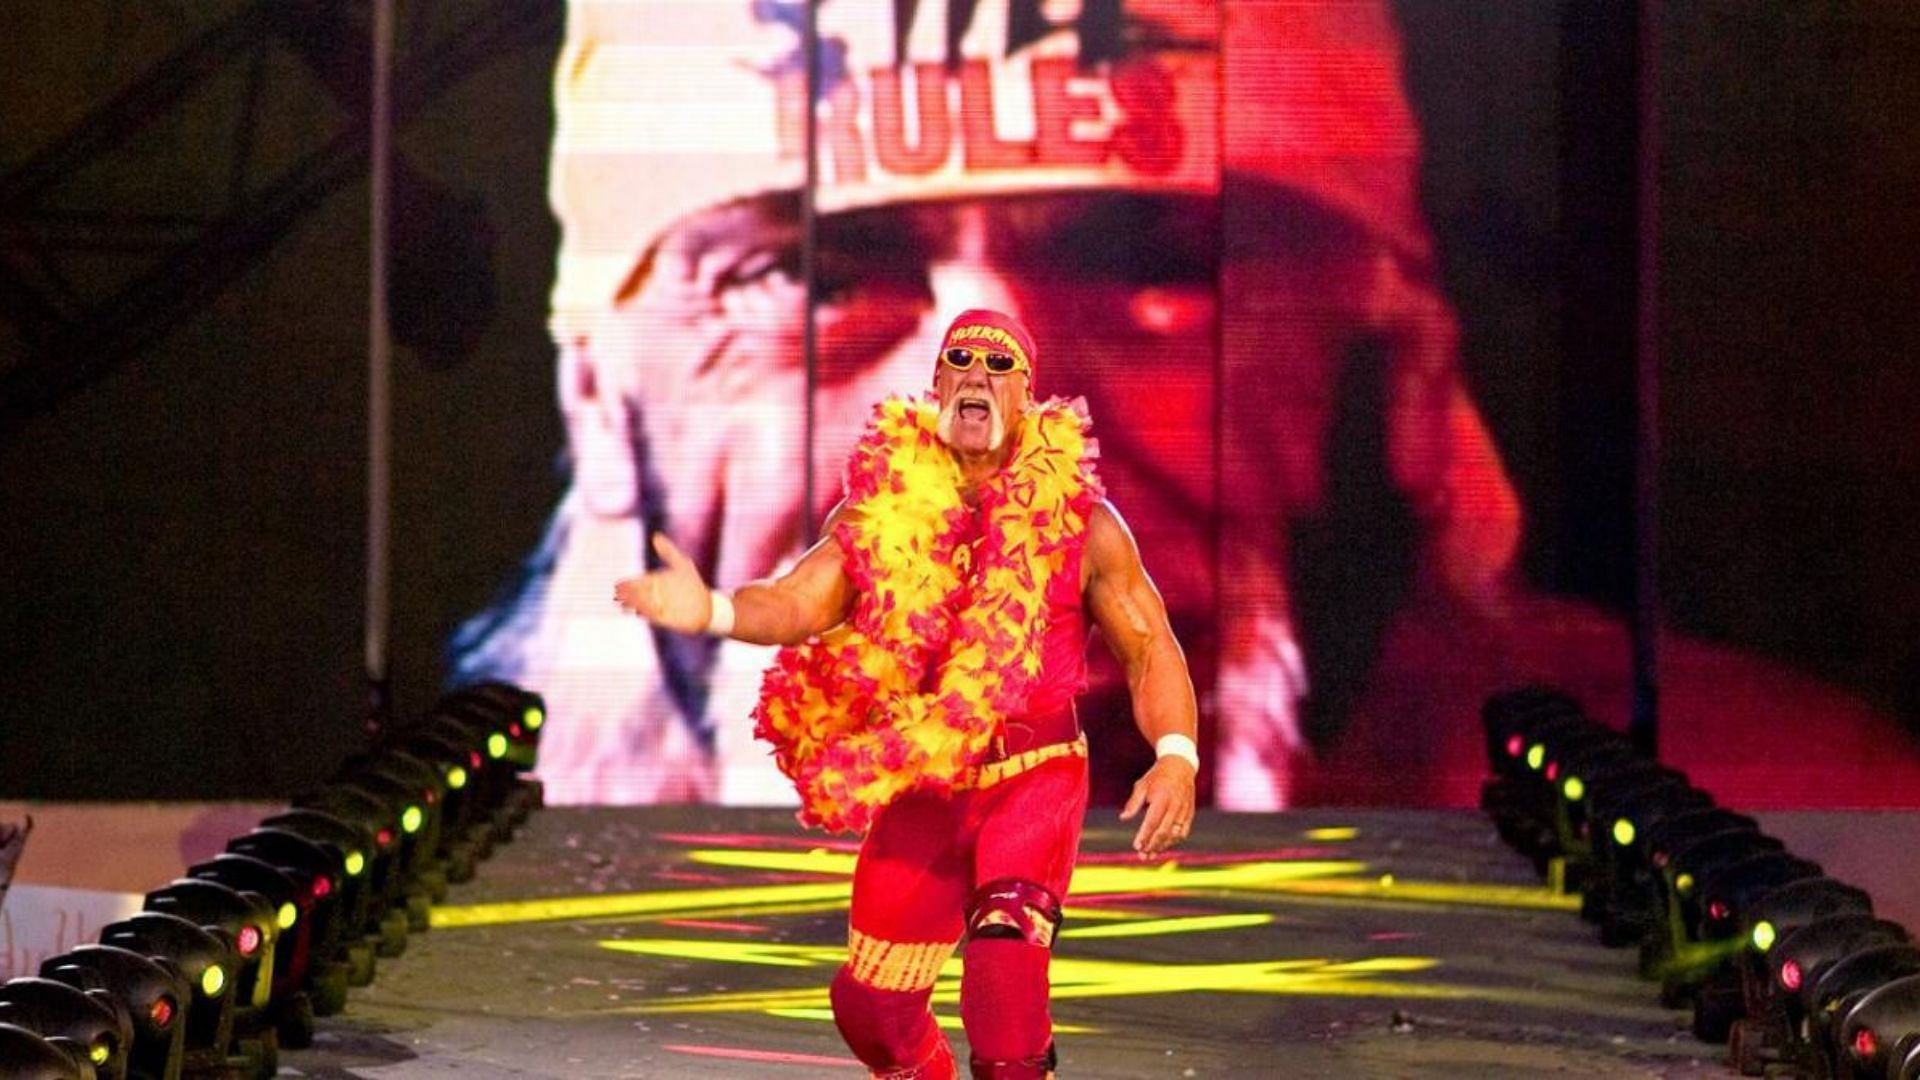 Hulk Hogan is one of the most recognizable wrestlers of all time